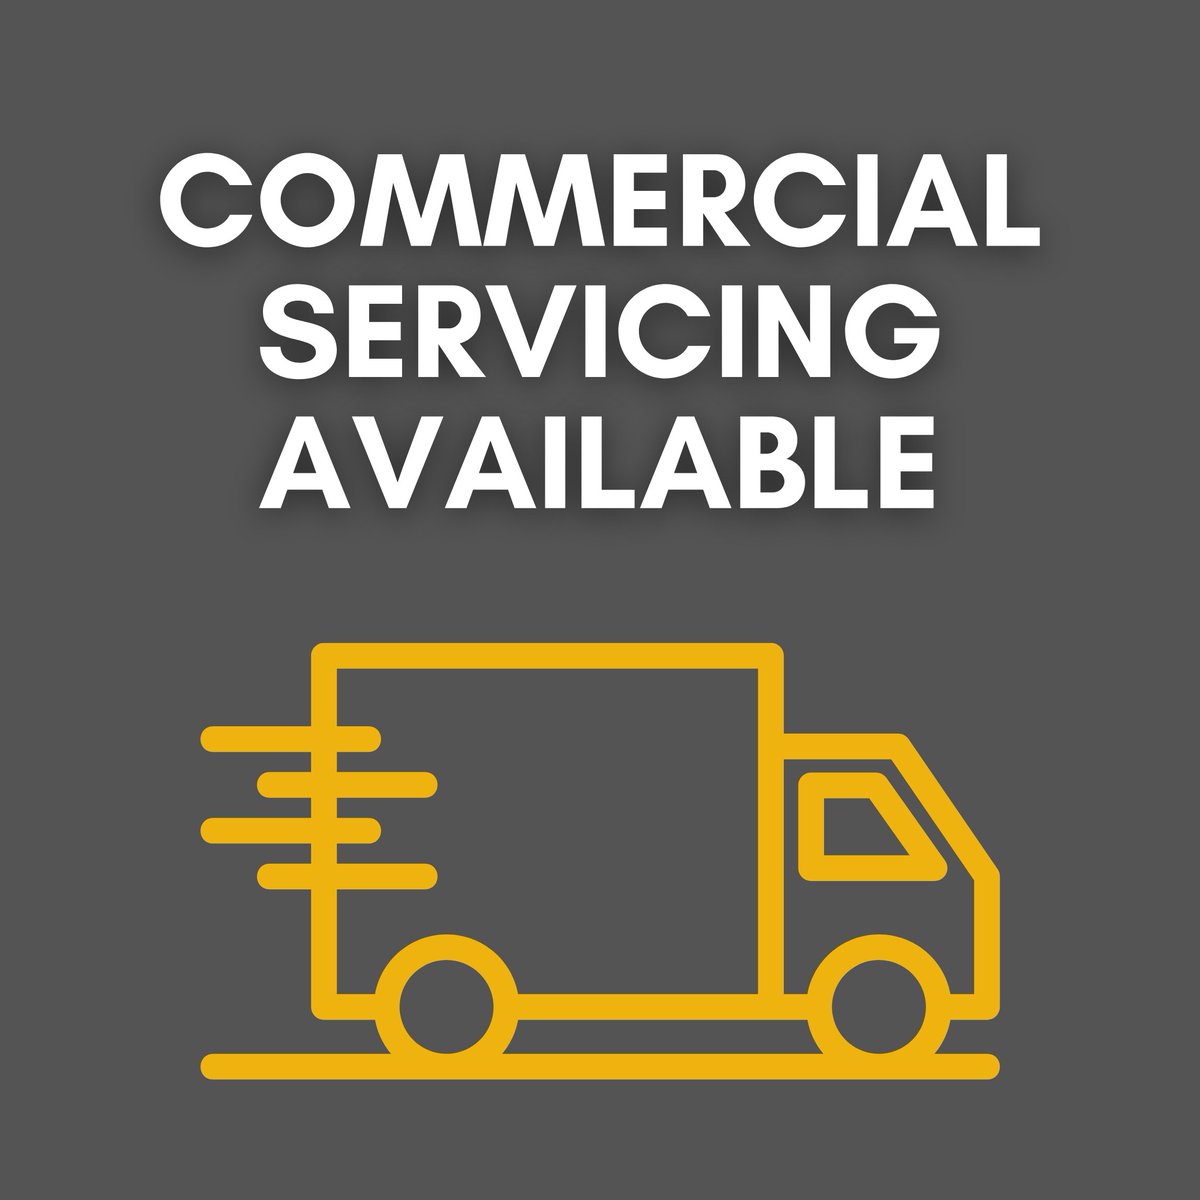 #DidYouKnow ...Commercial servicing is available at Hills Automotive?

📞 Enquire today on 01562 0777077.

#CarService #VanServicing #CommercialServicing #CommercialVehicle #MOT #CarMOT #Kidderminster